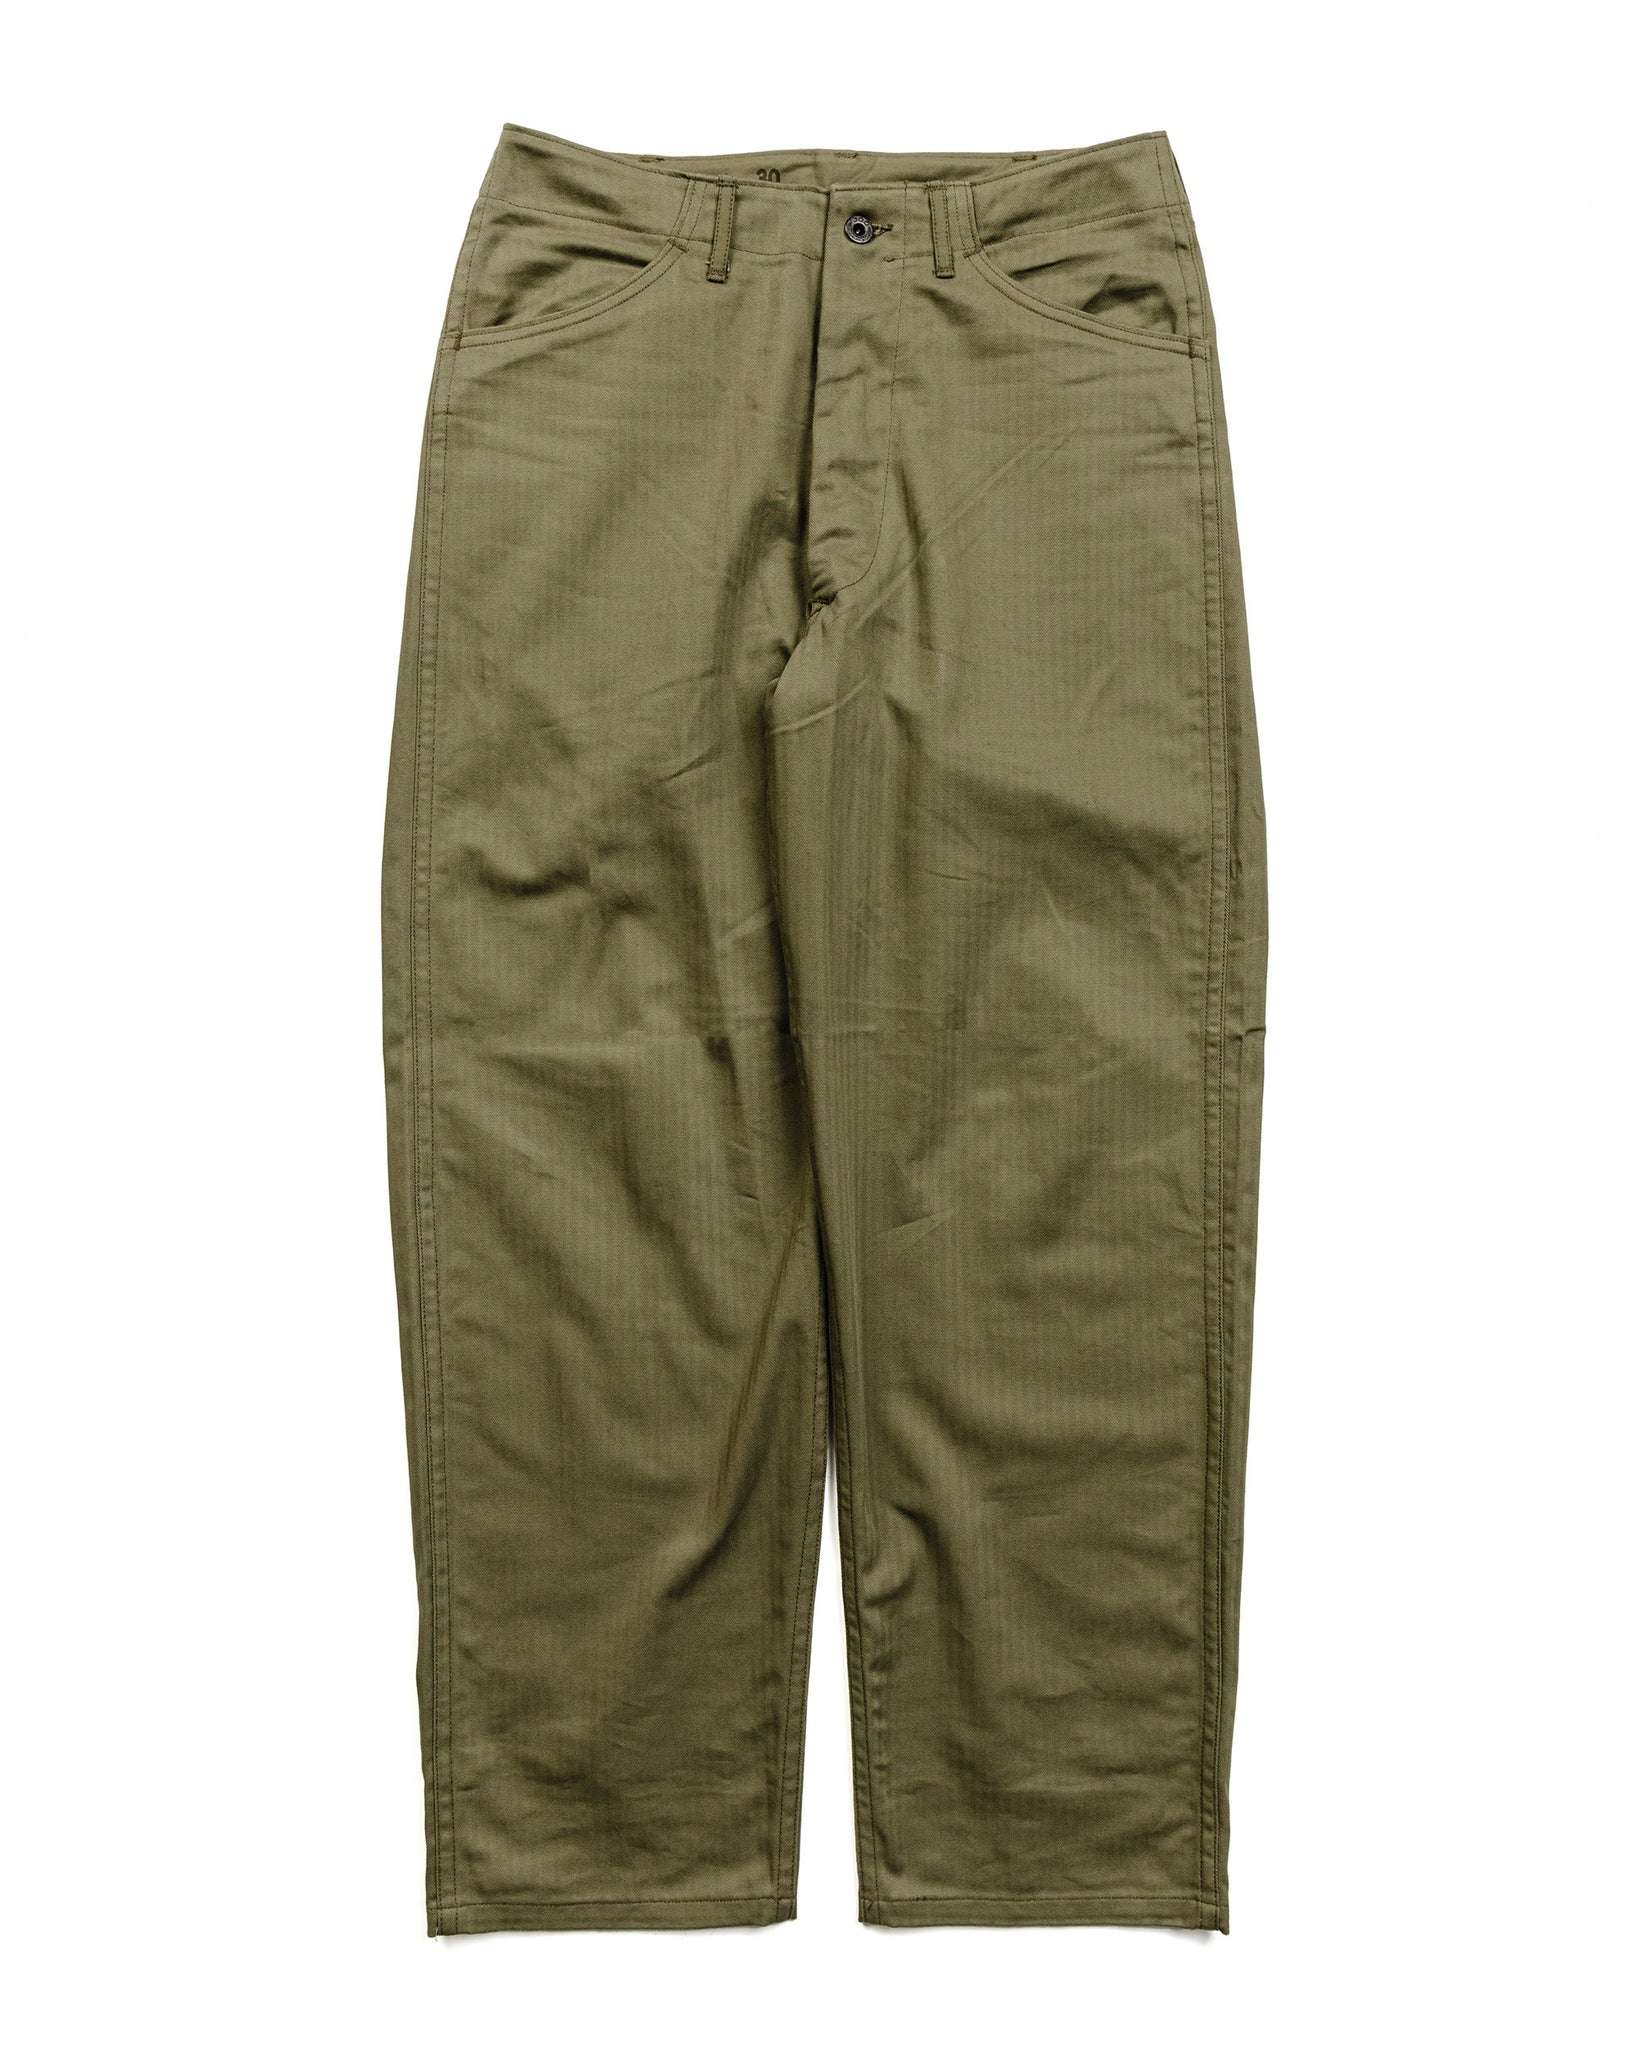 The Real McCoy's MP22007 Trousers, Utility N-3 (Model 220) Olive